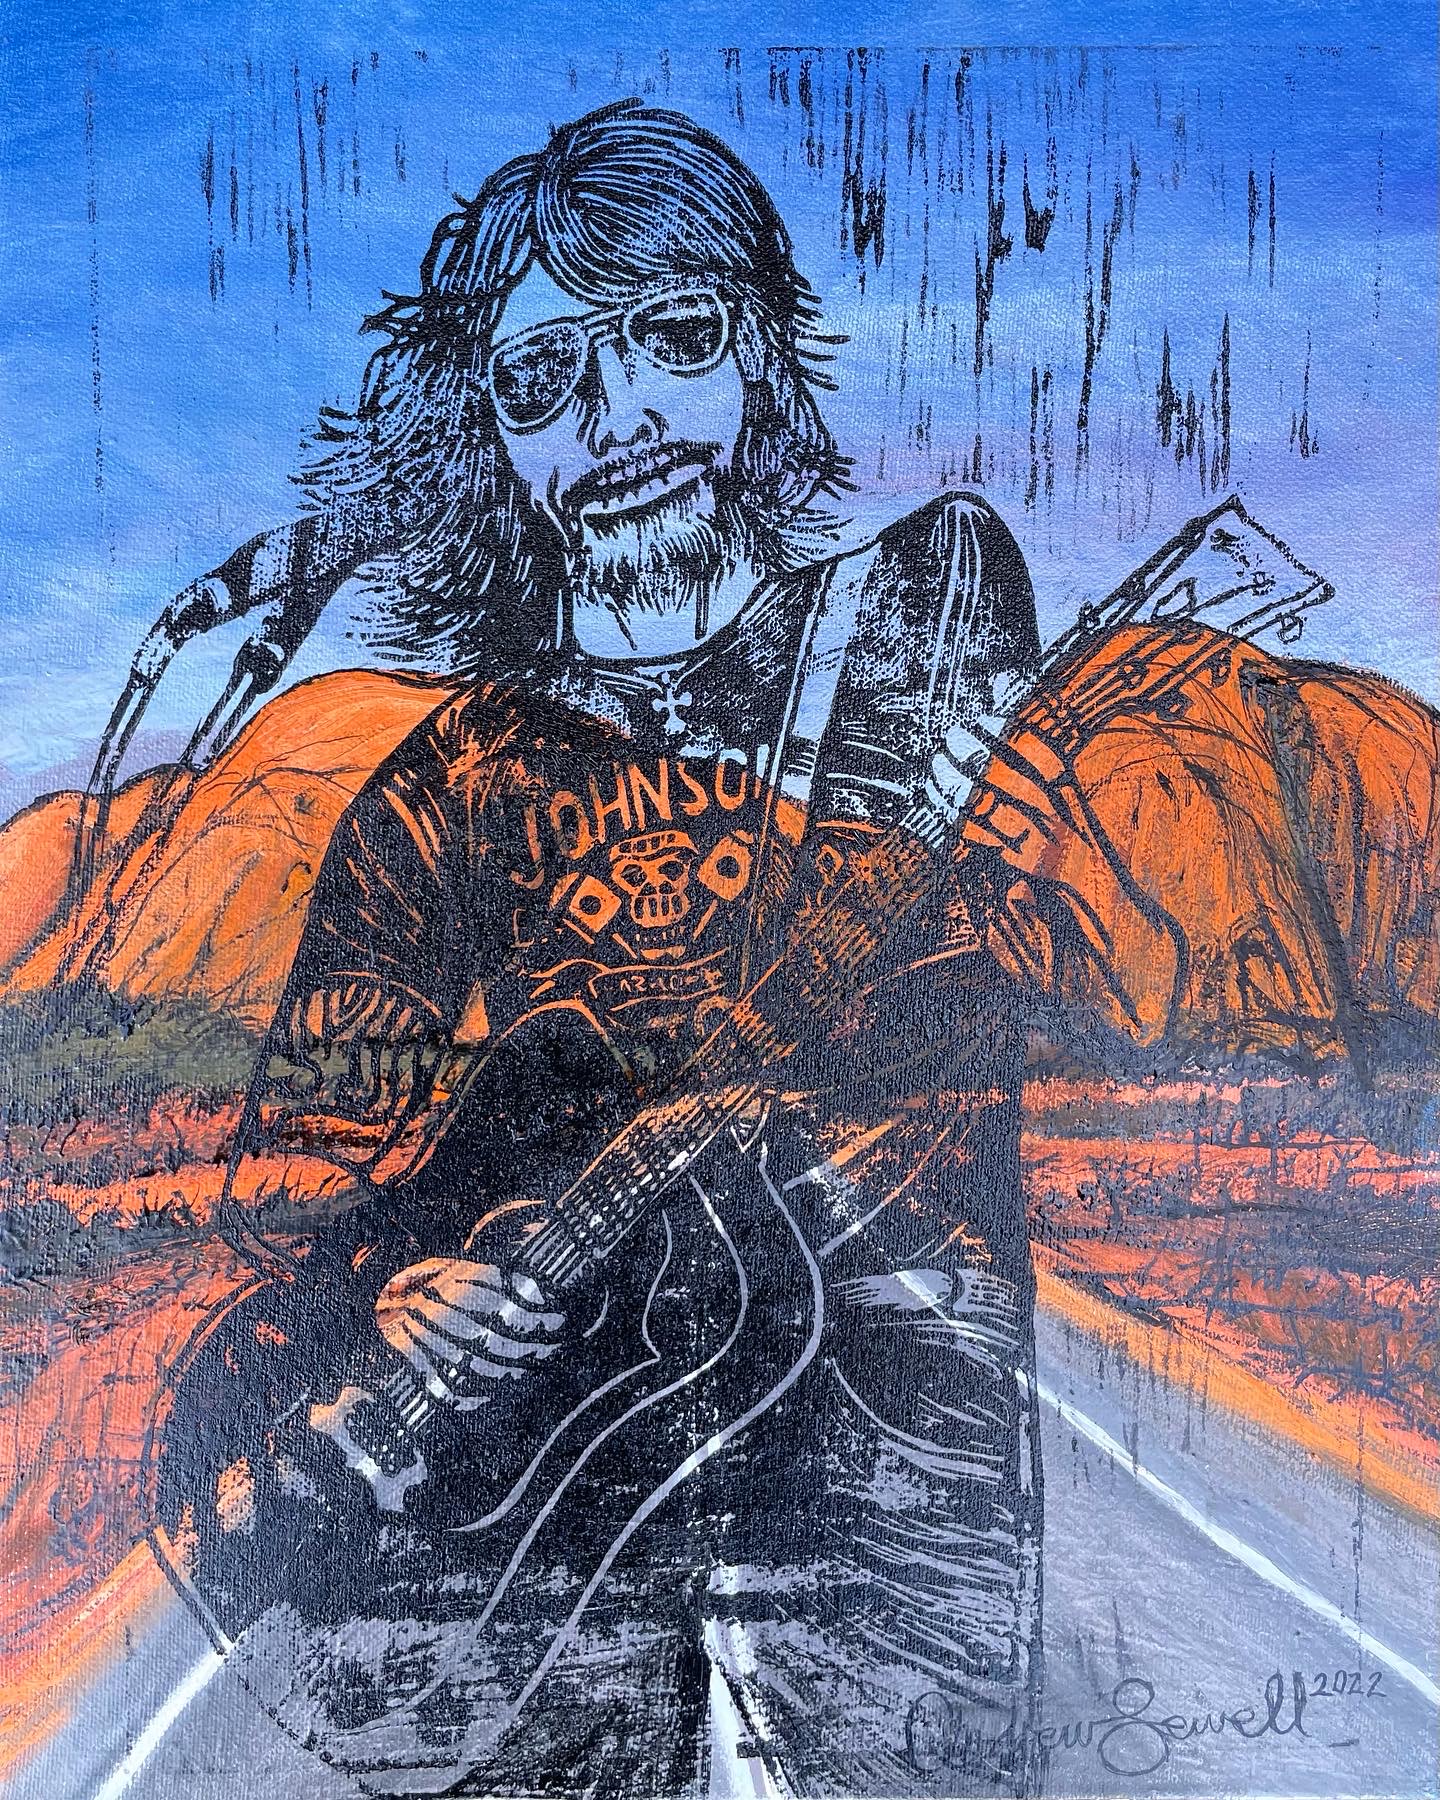 Dave Grohl - Road to Kata Tjuta  by Andrew Sewell  | Lethbridge 20000 2022 Finalists | Lethbridge Gallery